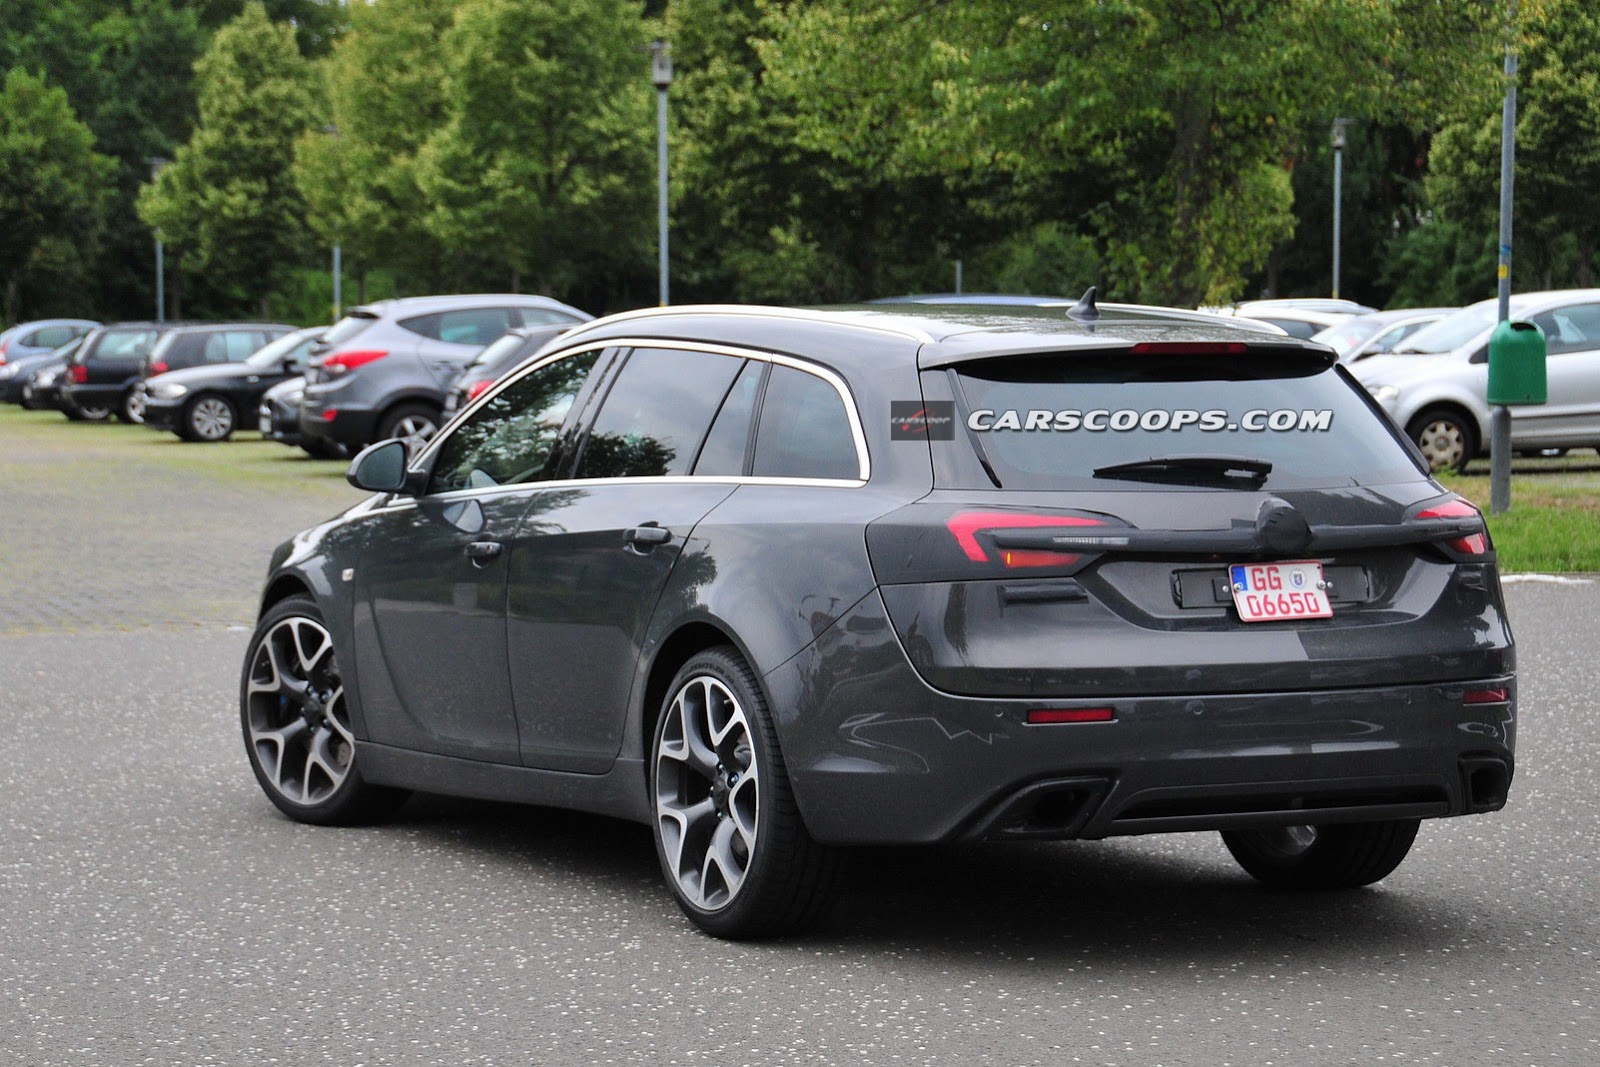 2014 Opel Insignia OPC Sports Tourer Backgrounds, Compatible - PC, Mobile, Gadgets| 1600x1067 px